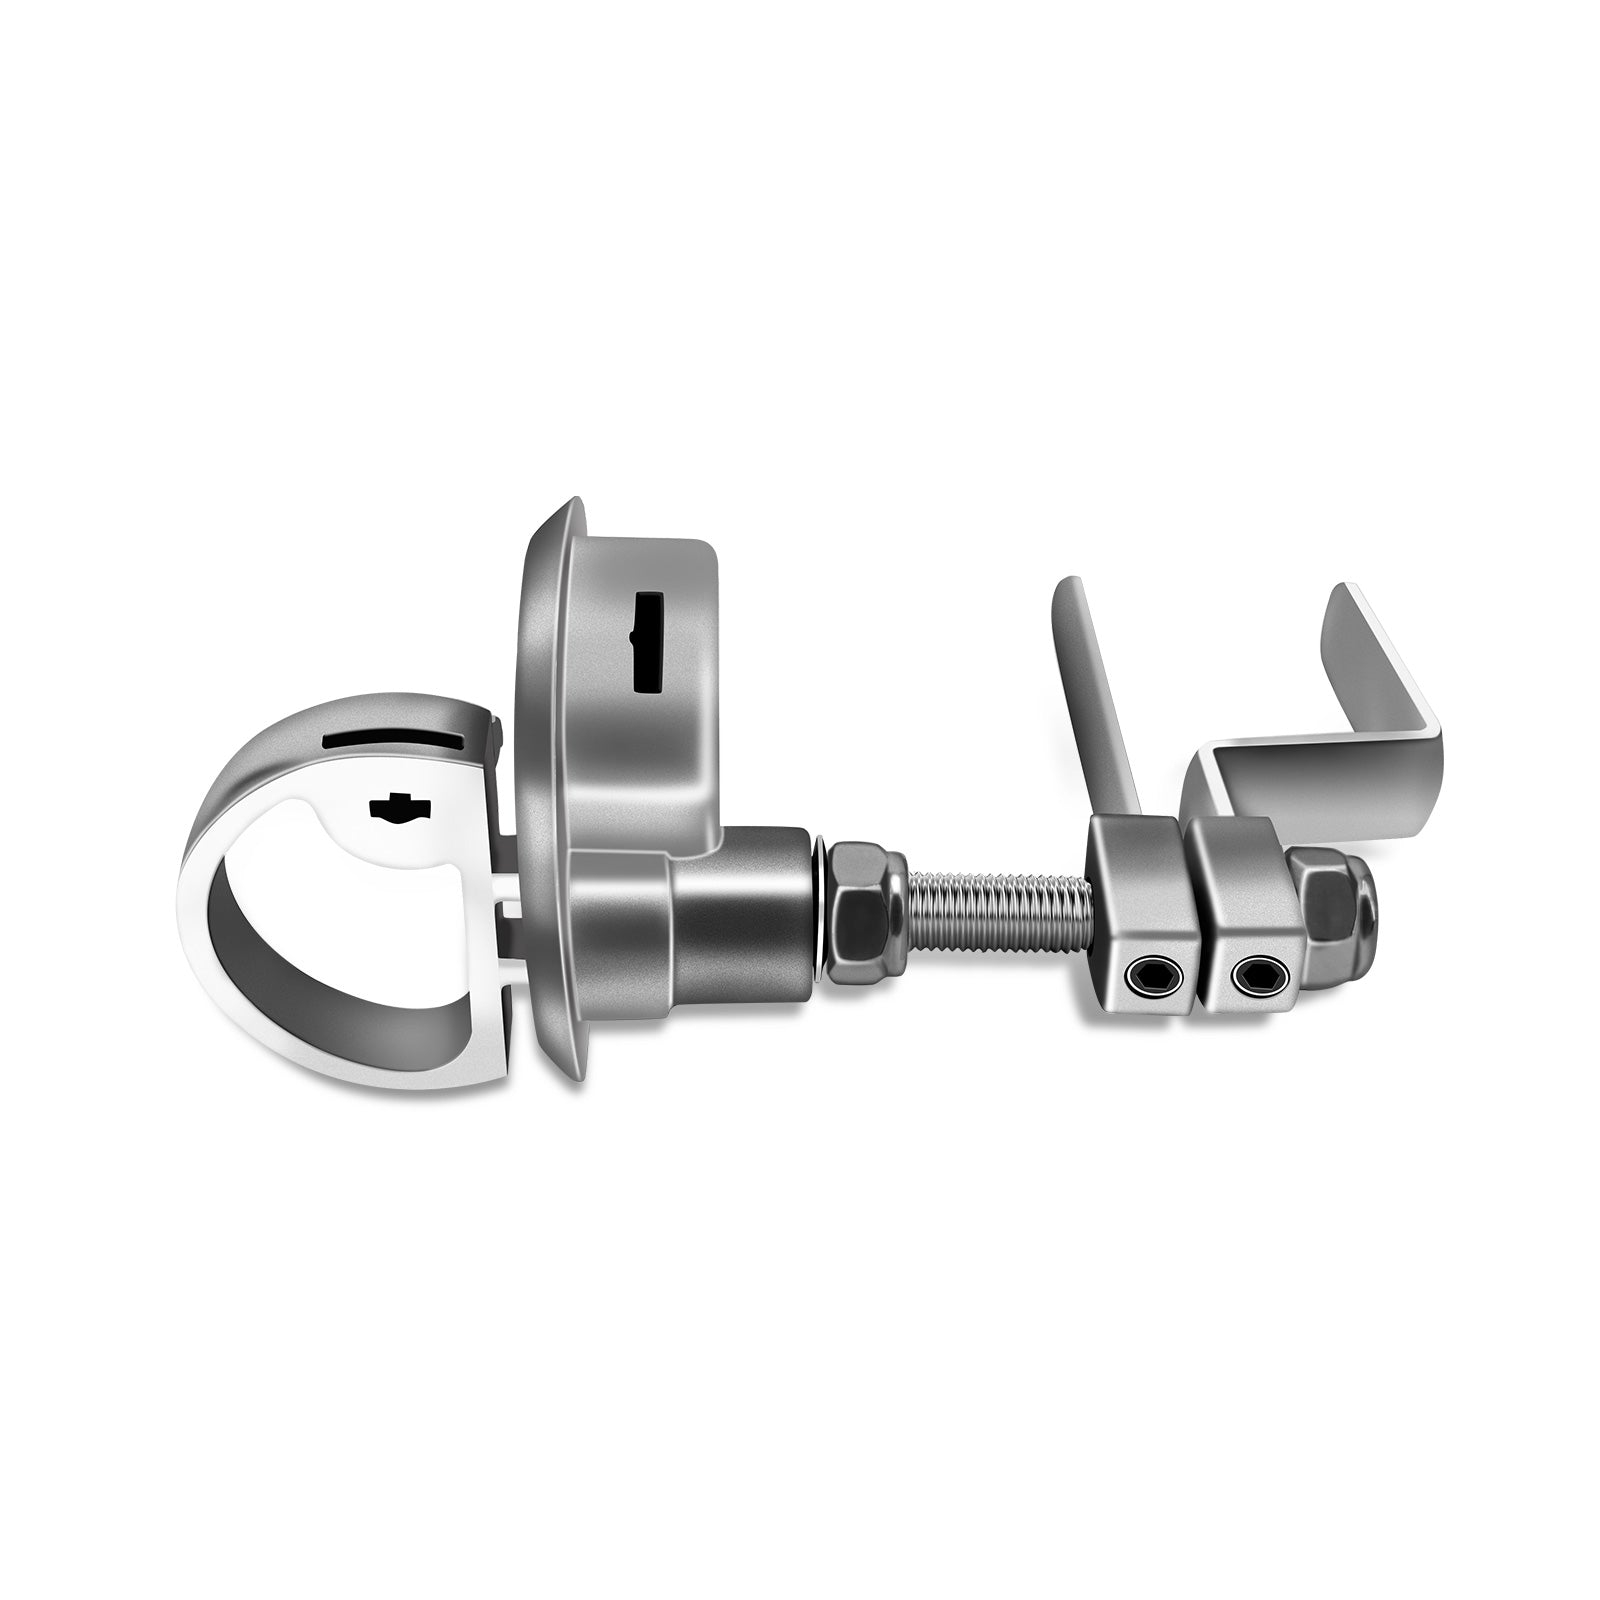 Nerites Boat Floor Buckle Hatch Latch Marine Grade 316 Stainless Steel Flush Turning Lift Handle Lock Style with 2 Keys and 2 Screws